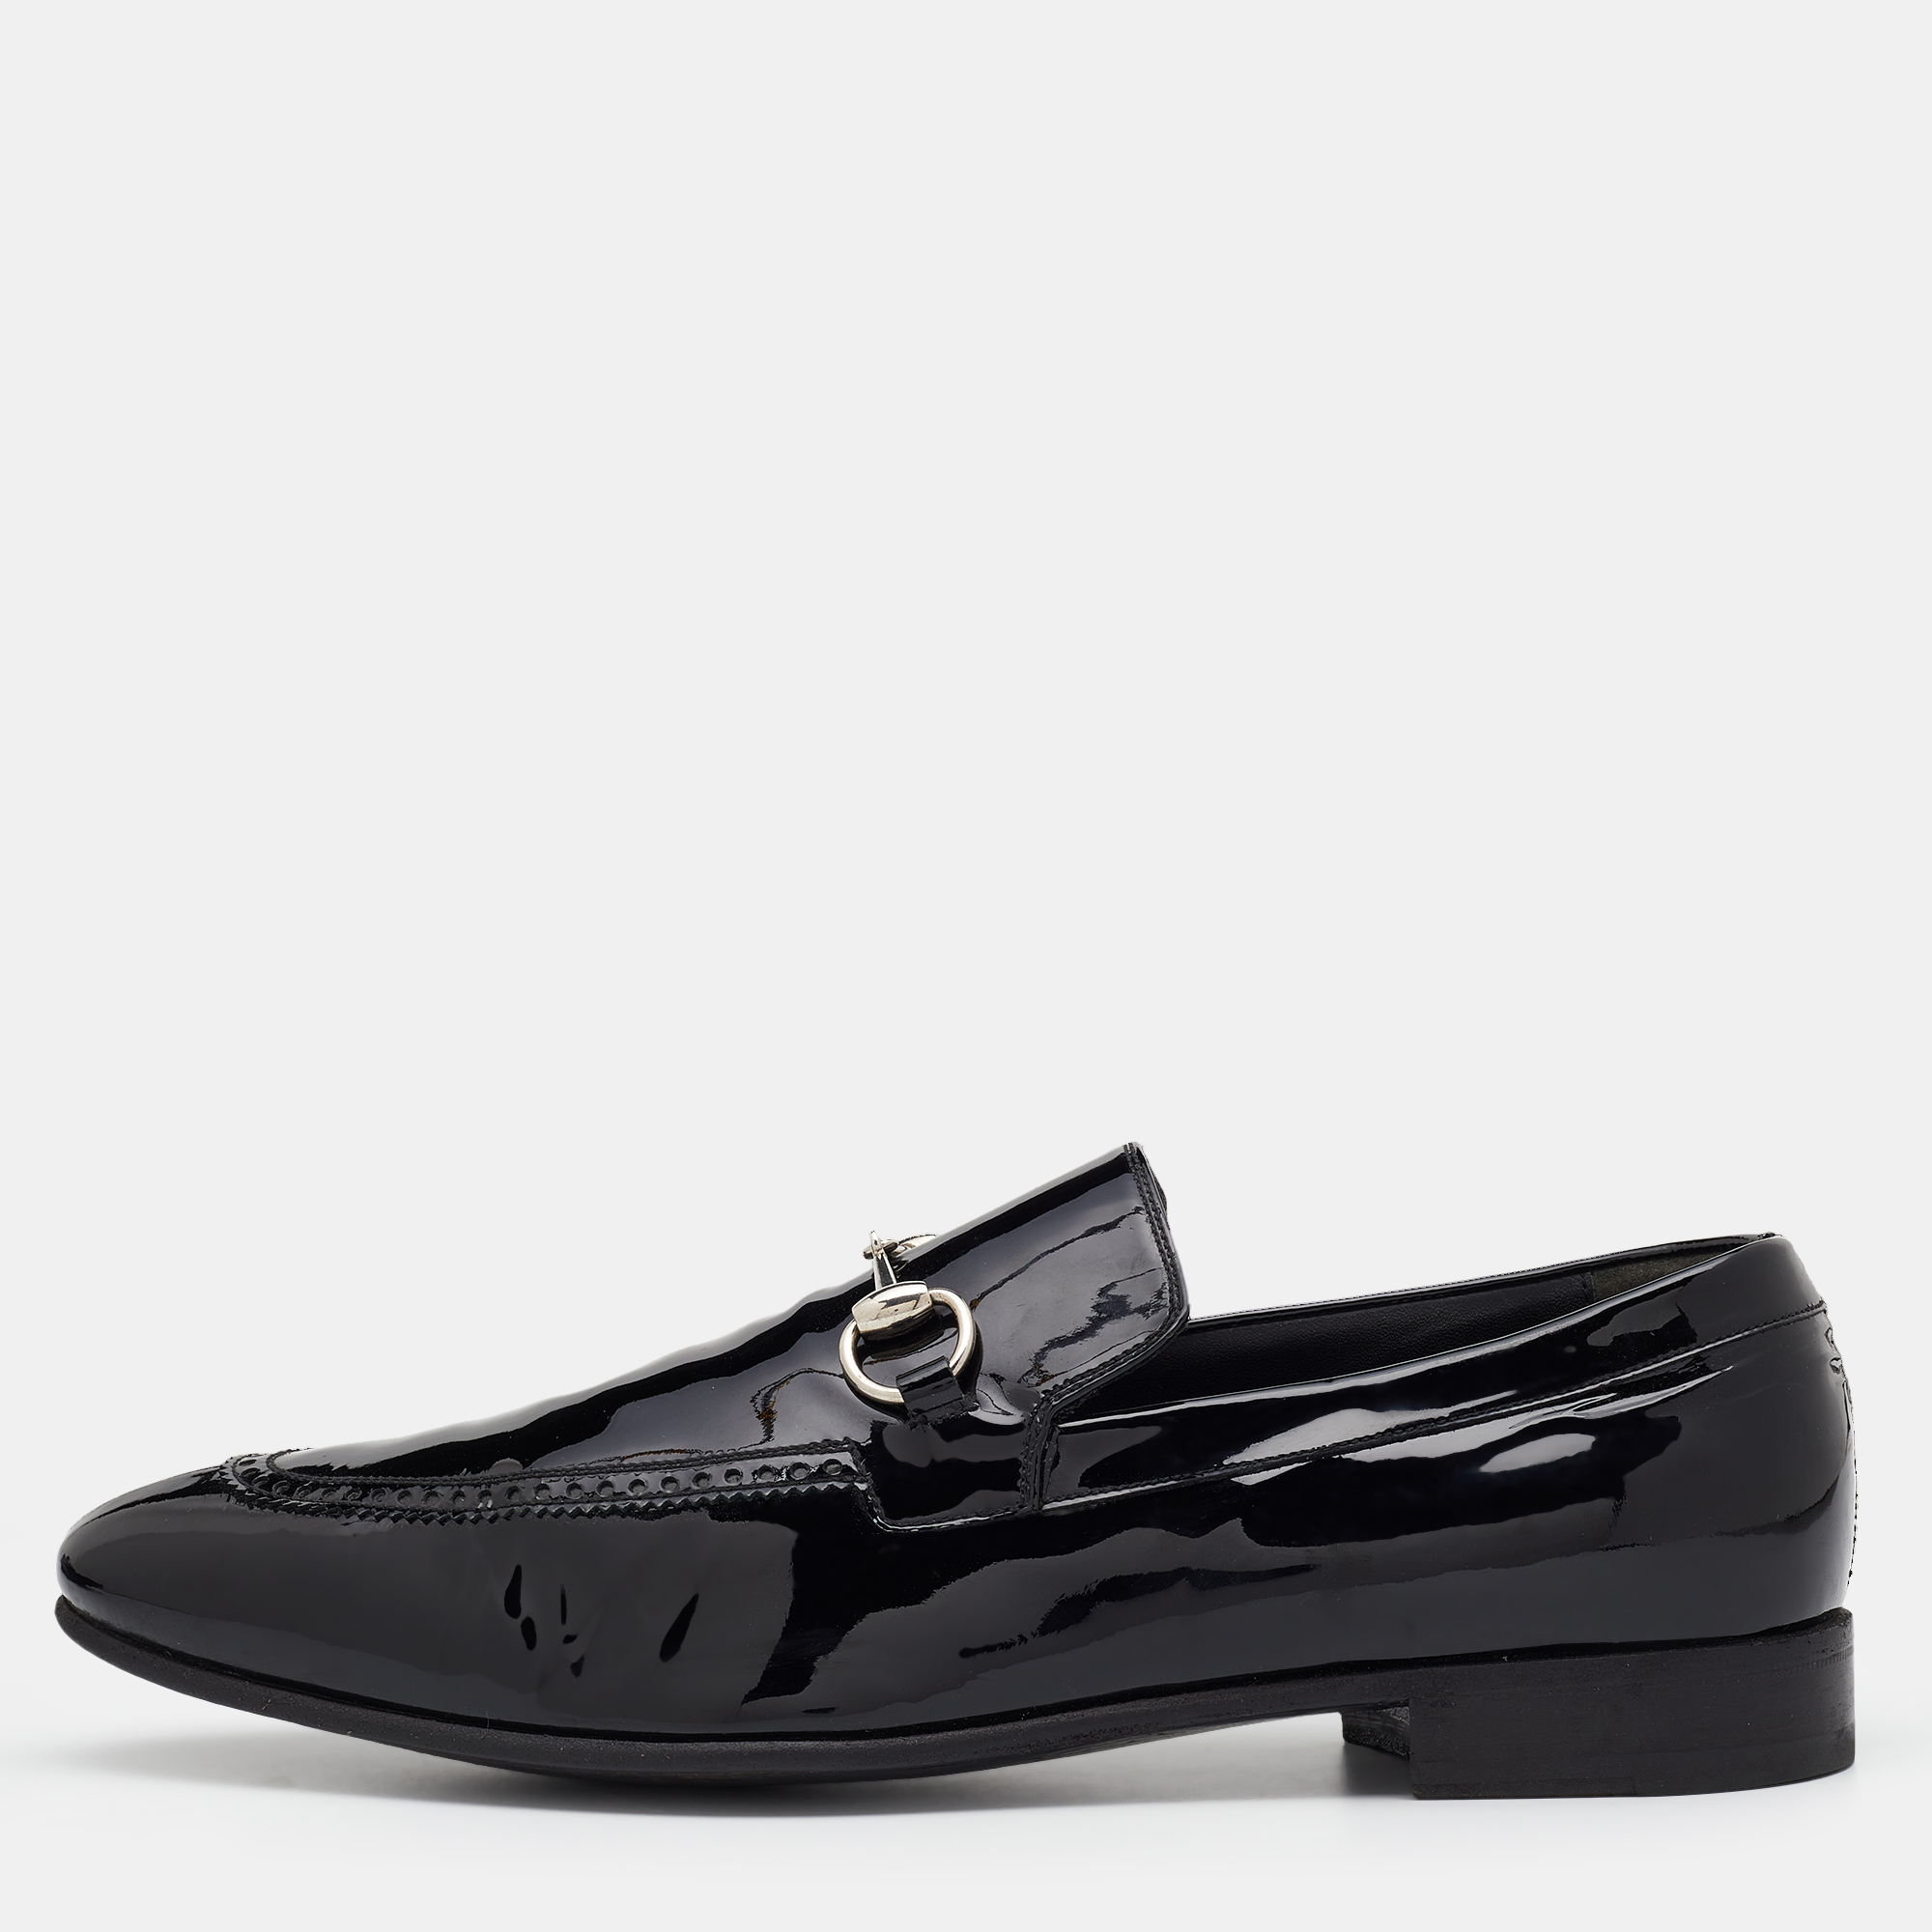 

Gucci Black Patent Leather Horsebit Slip On Loafers Size